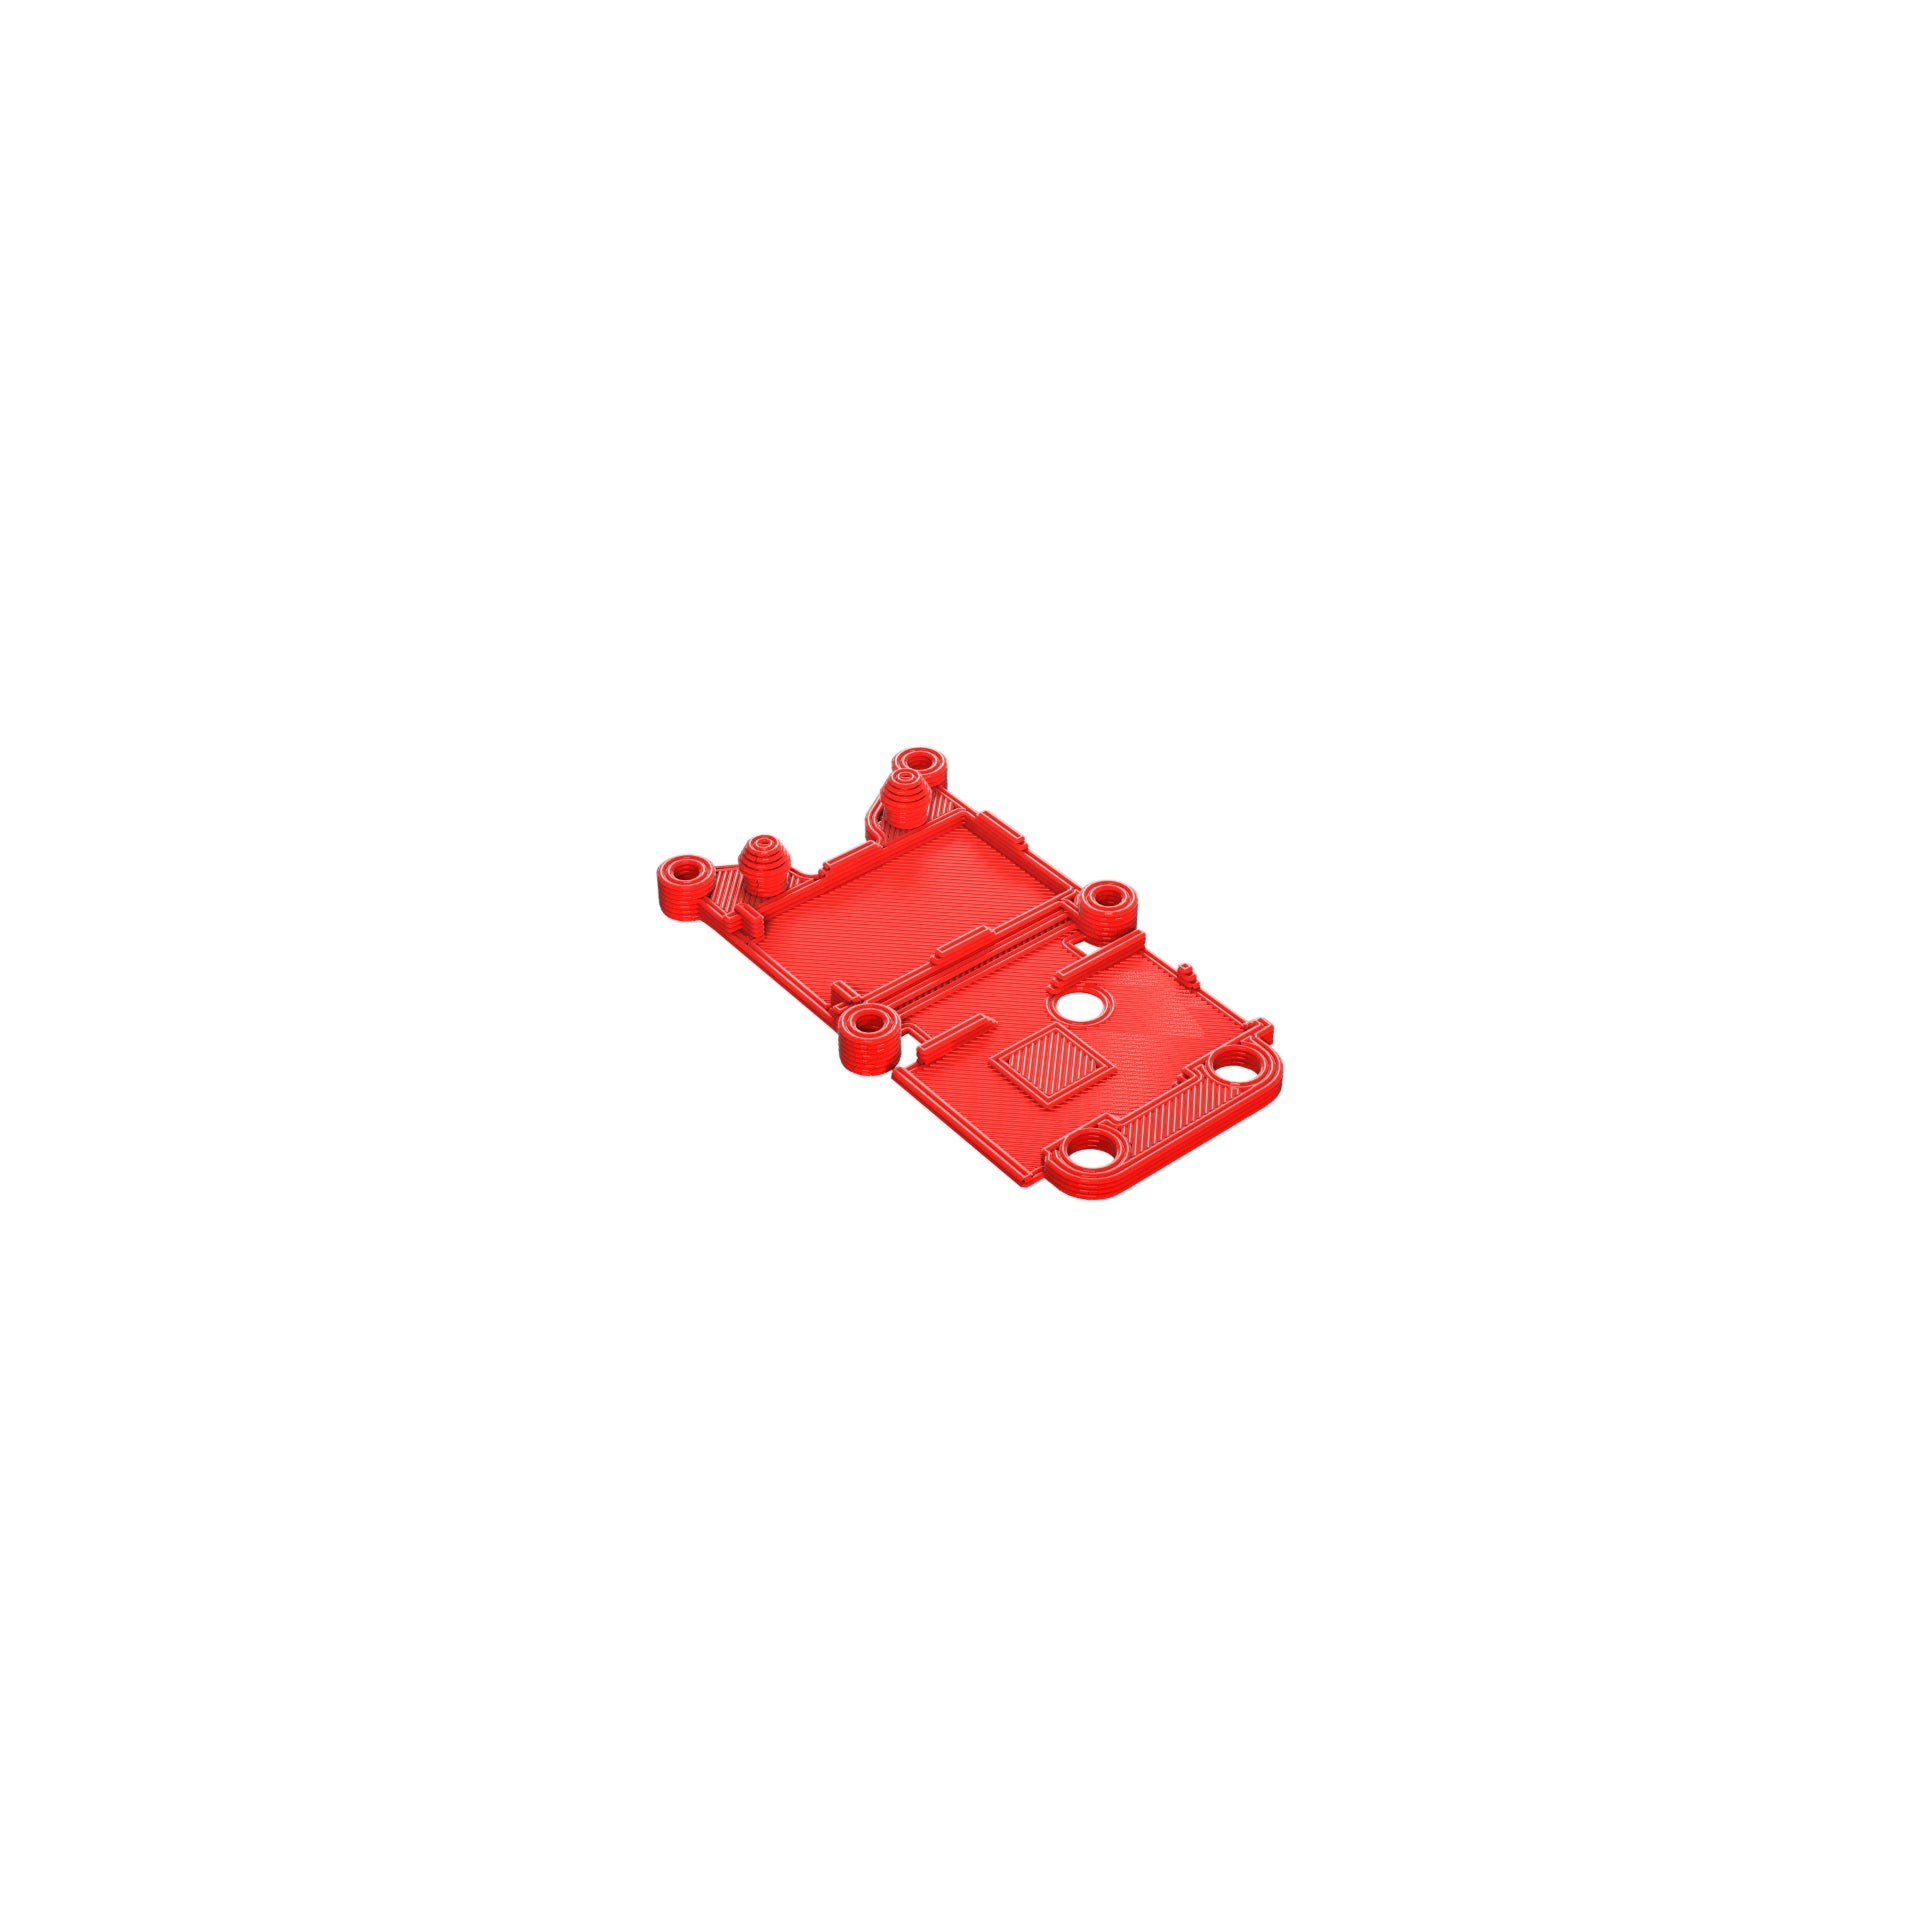 Crossfire 20 x 20 TPU Stack Mount 3D Printed Red